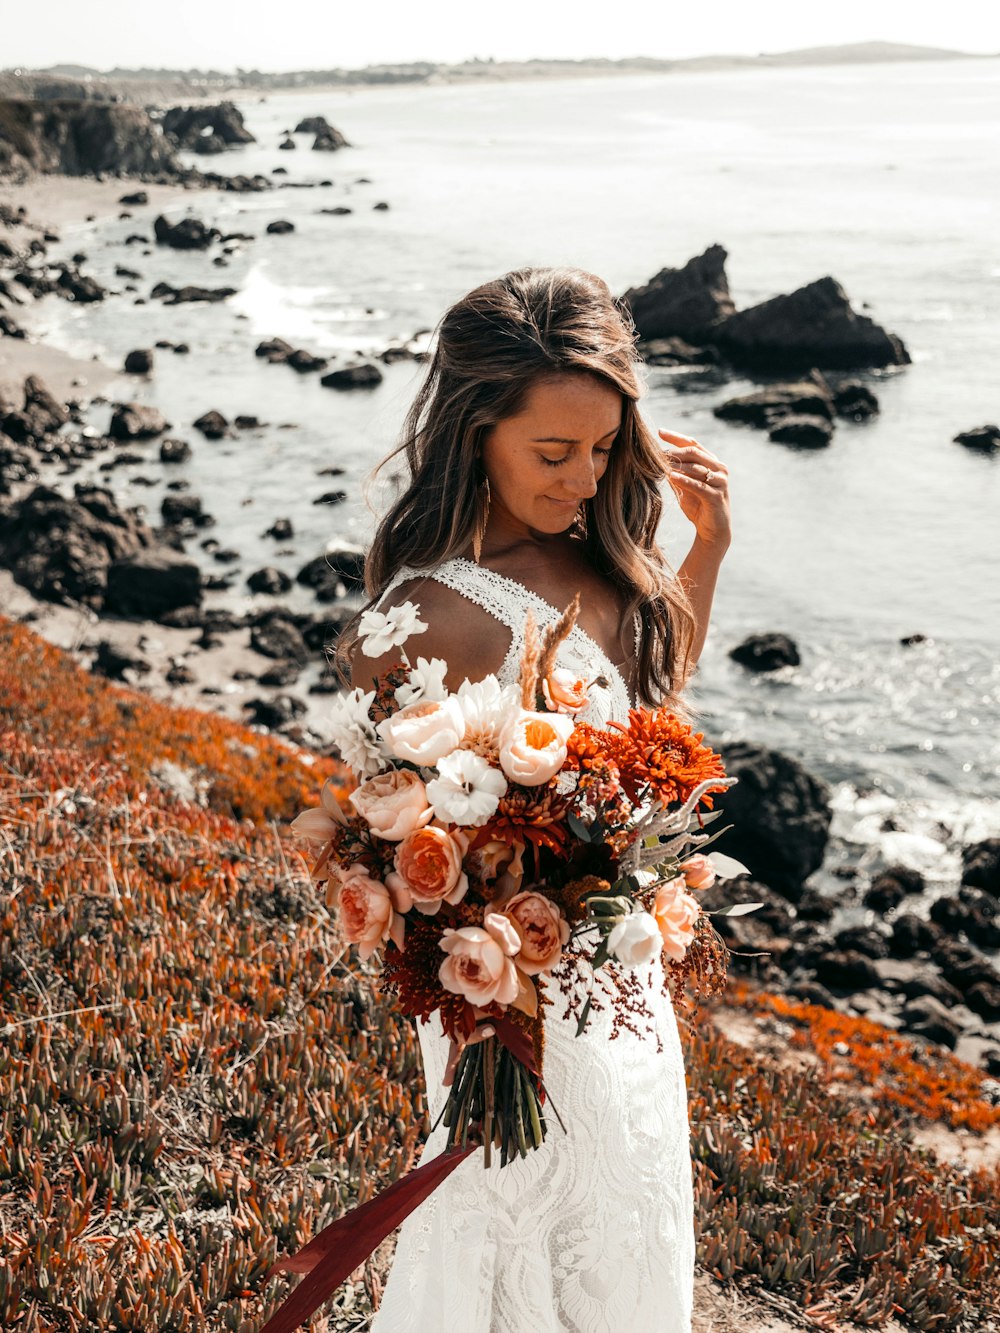 woman in white dress holding bouquet of flowers standing on rocky shore during daytime